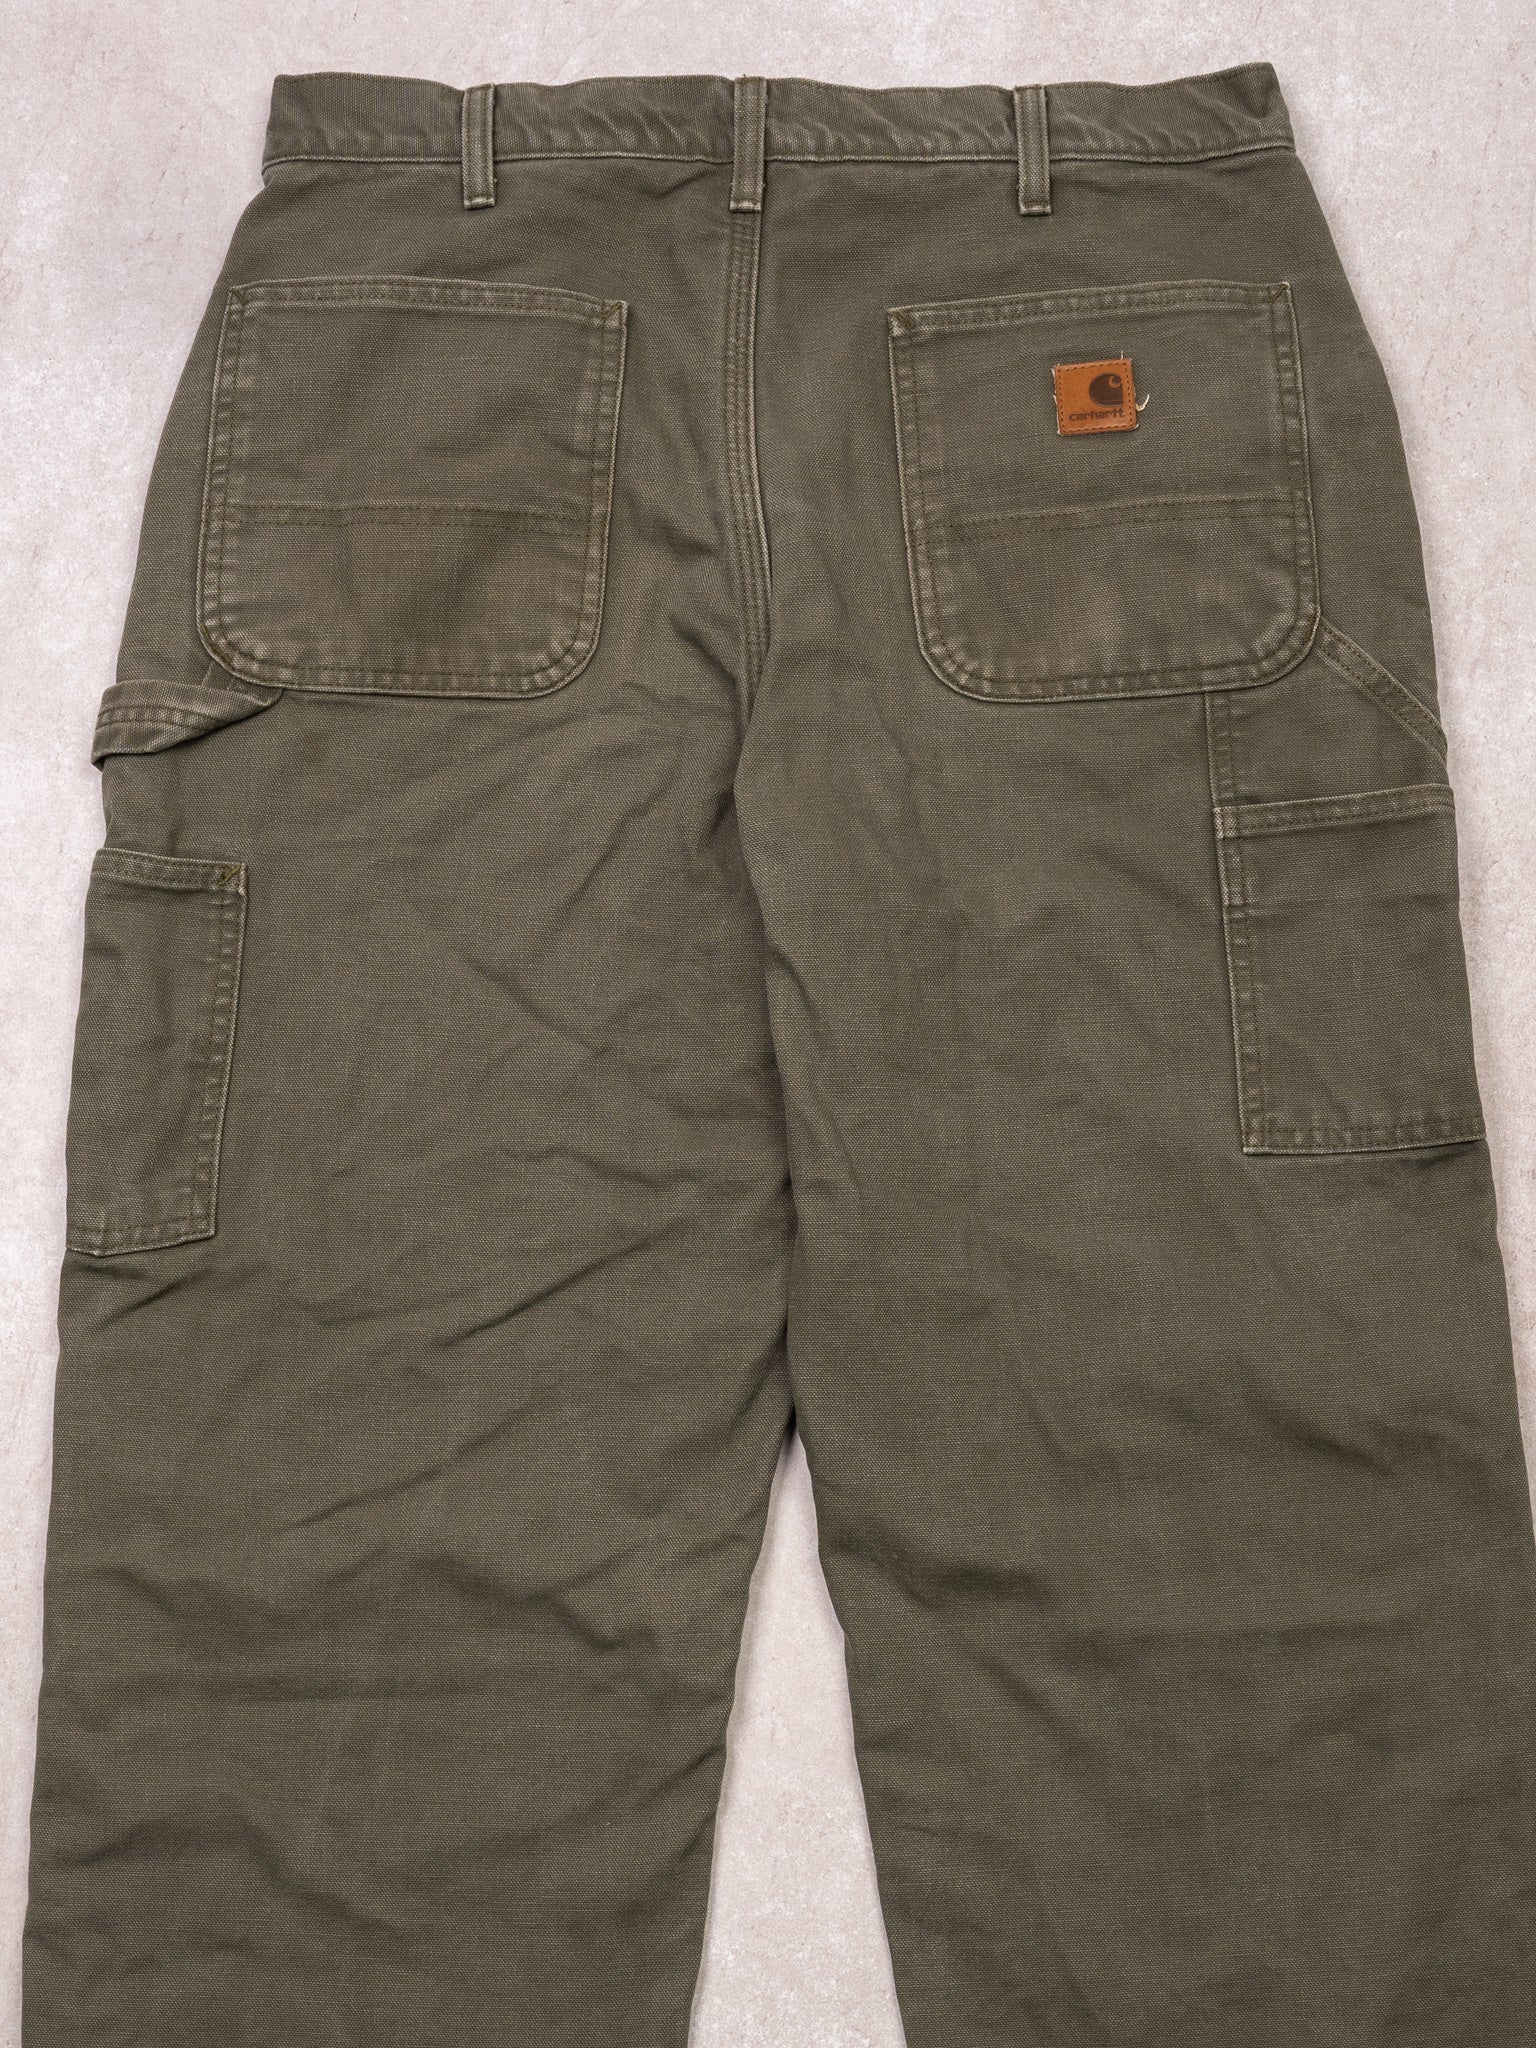 Vintage Olive Green Carhartt Dungaree Fit Cargo Pants (34 x 34)